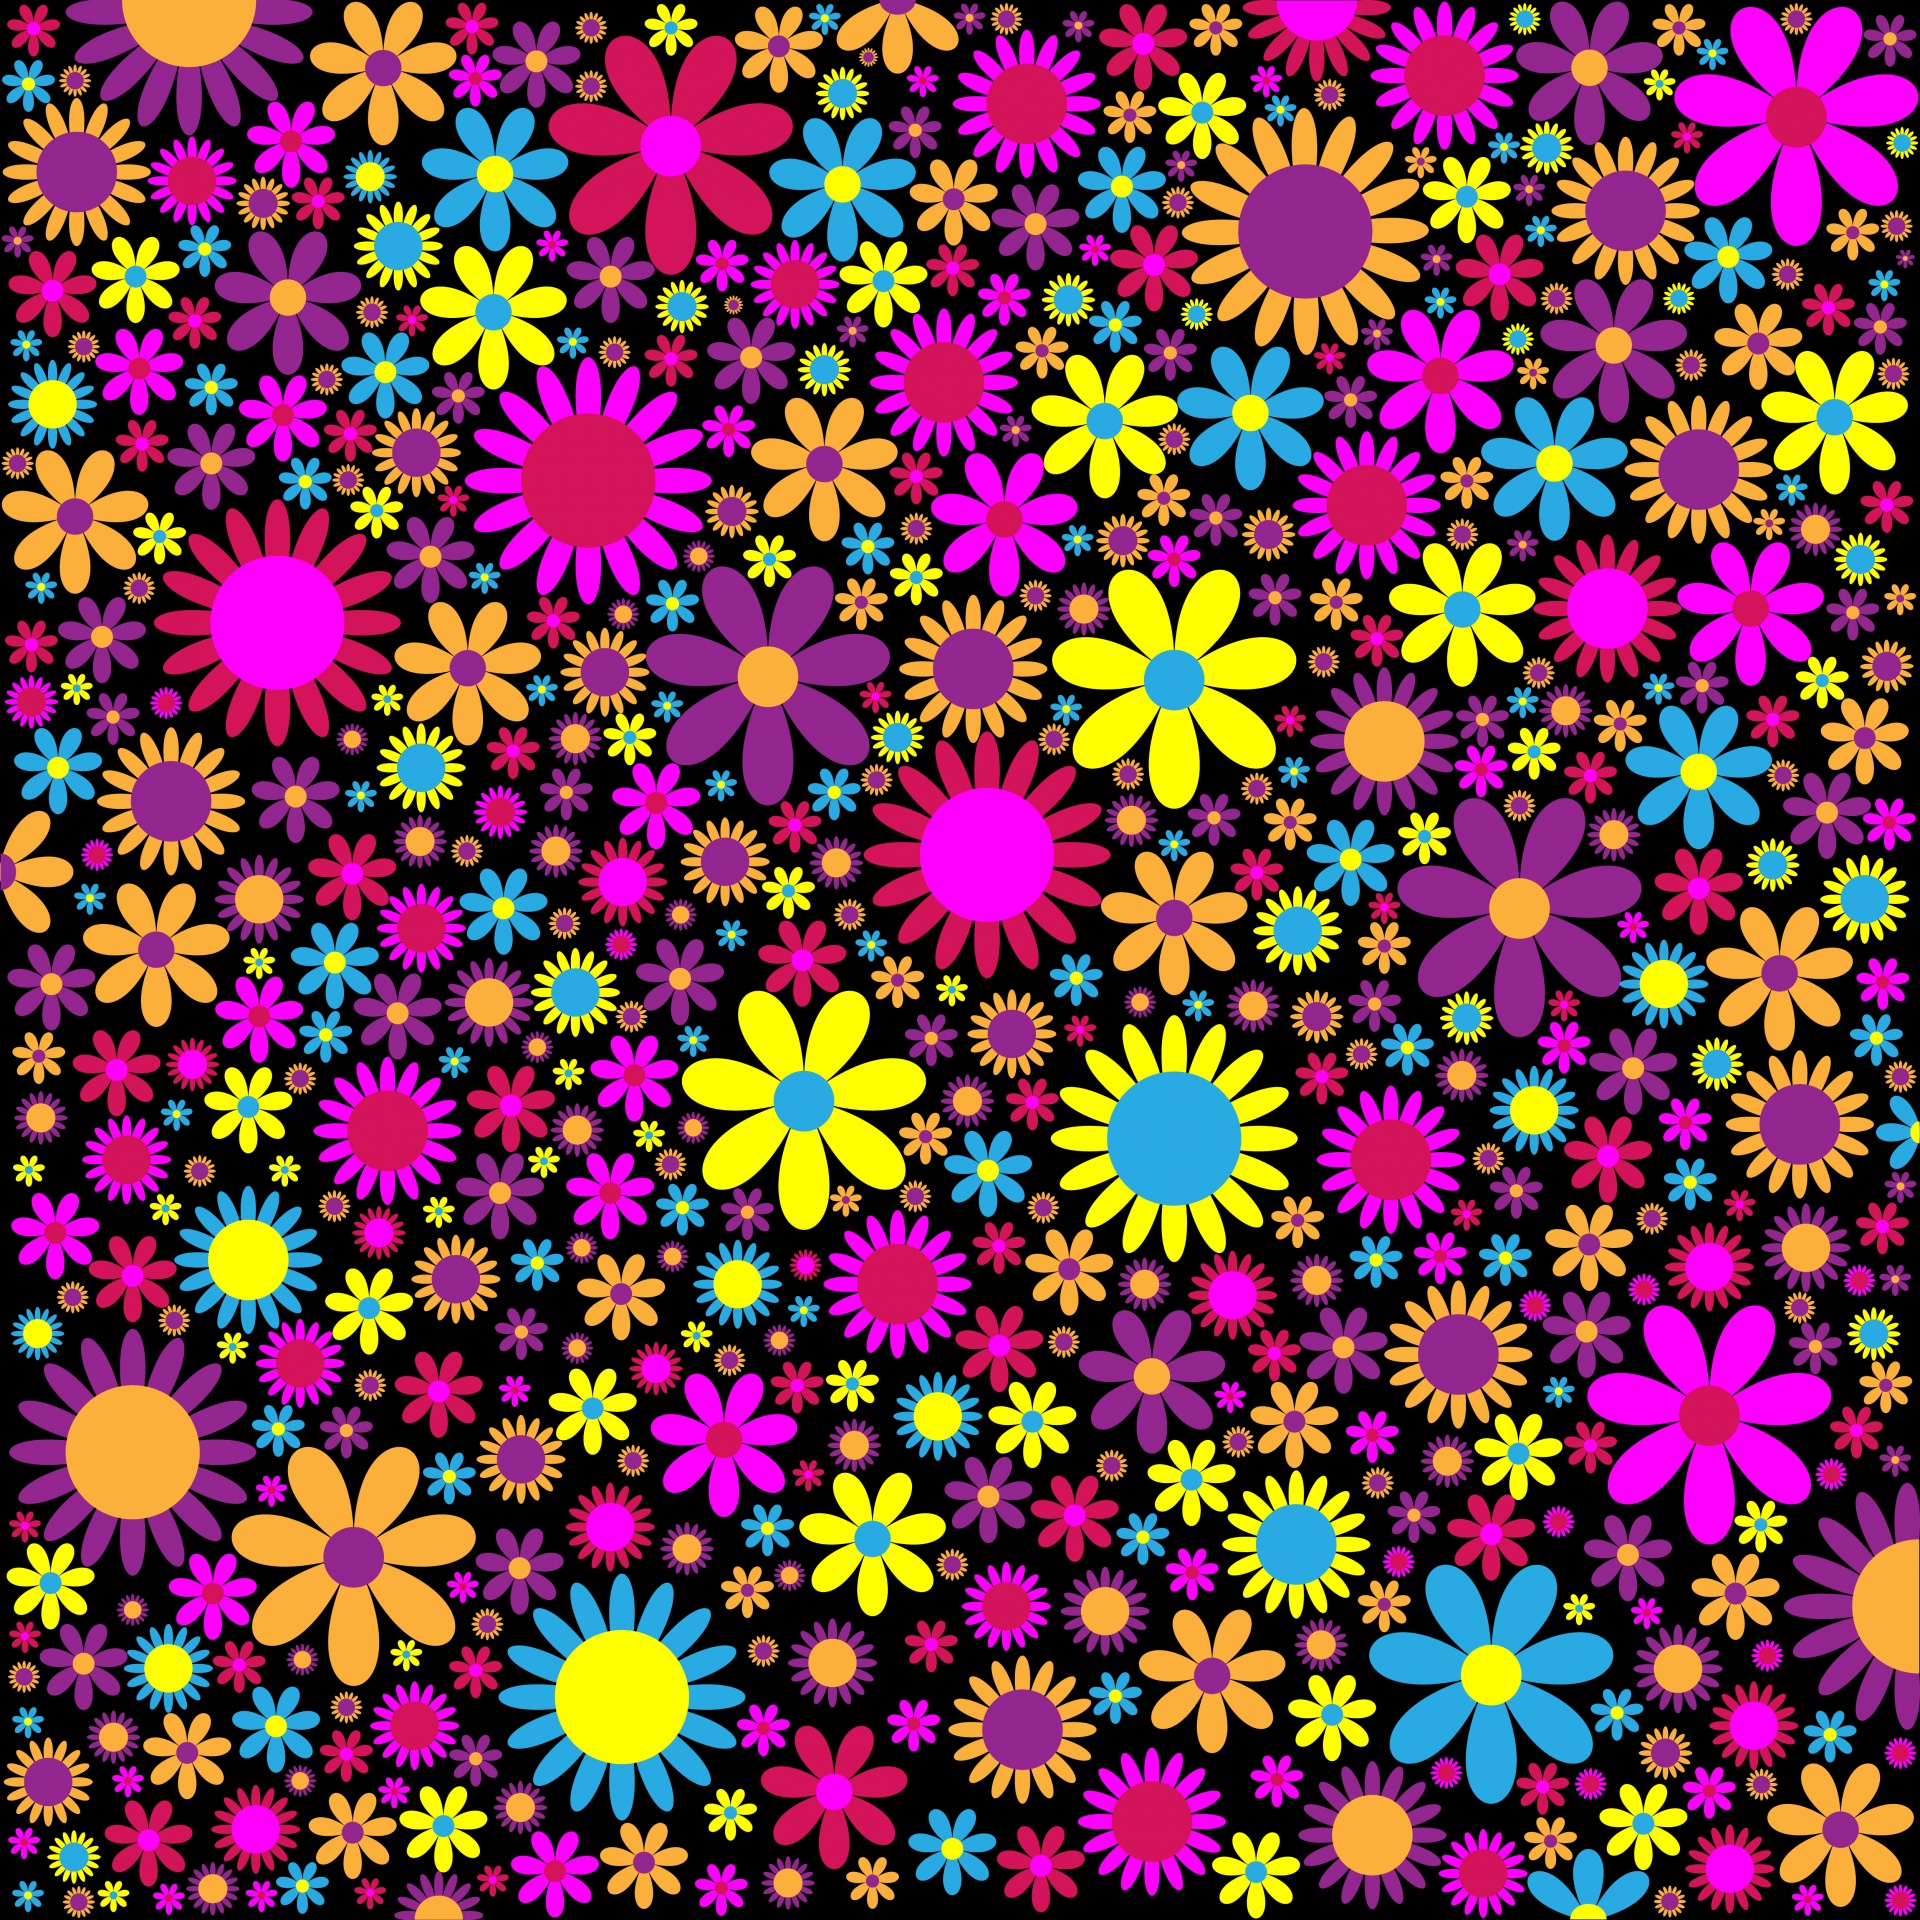 Bright and busy floral wallpaper background